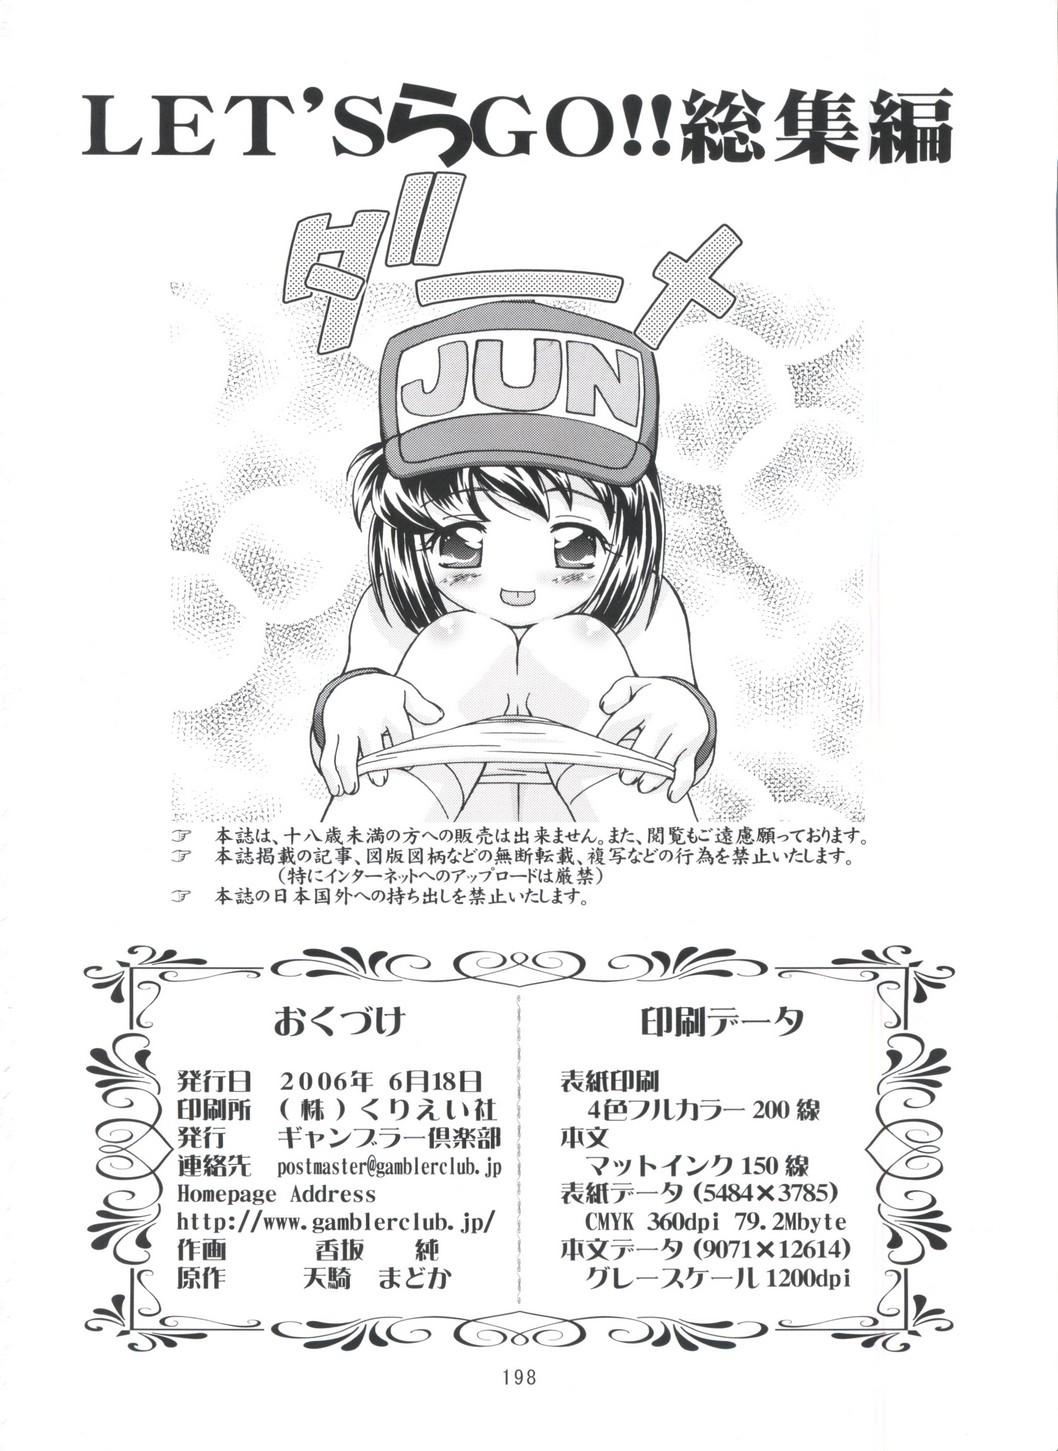 Youporn Let's Ra Go! Soushuuhen - Bakusou kyoudai lets and go Eating Pussy - Page 197